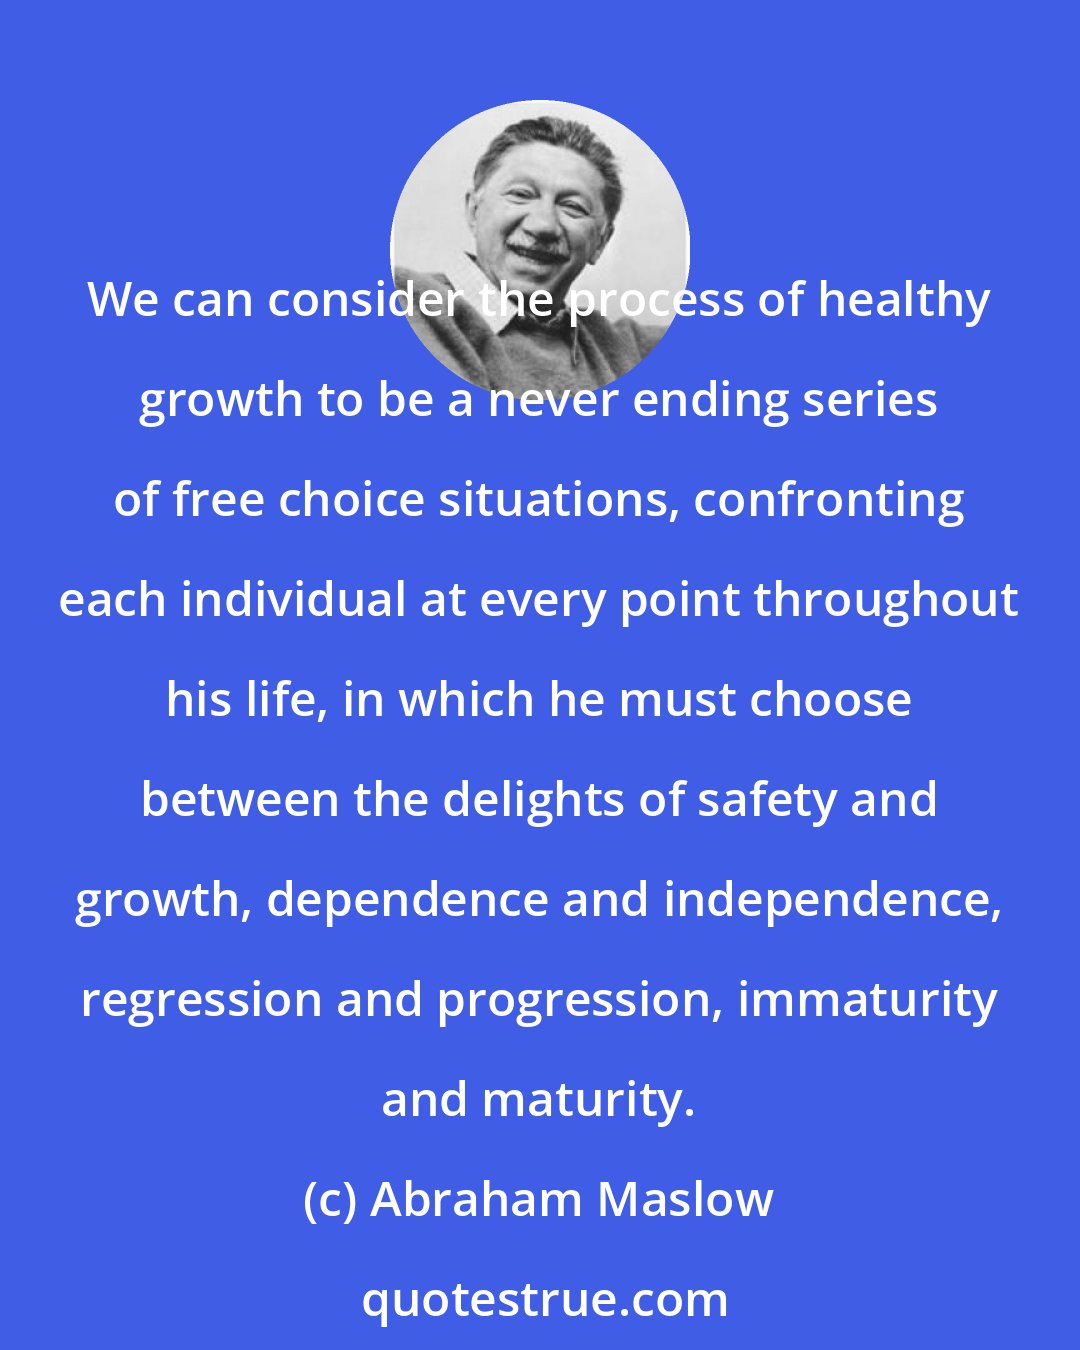 Abraham Maslow: We can consider the process of healthy growth to be a never ending series of free choice situations, confronting each individual at every point throughout his life, in which he must choose between the delights of safety and growth, dependence and independence, regression and progression, immaturity and maturity.